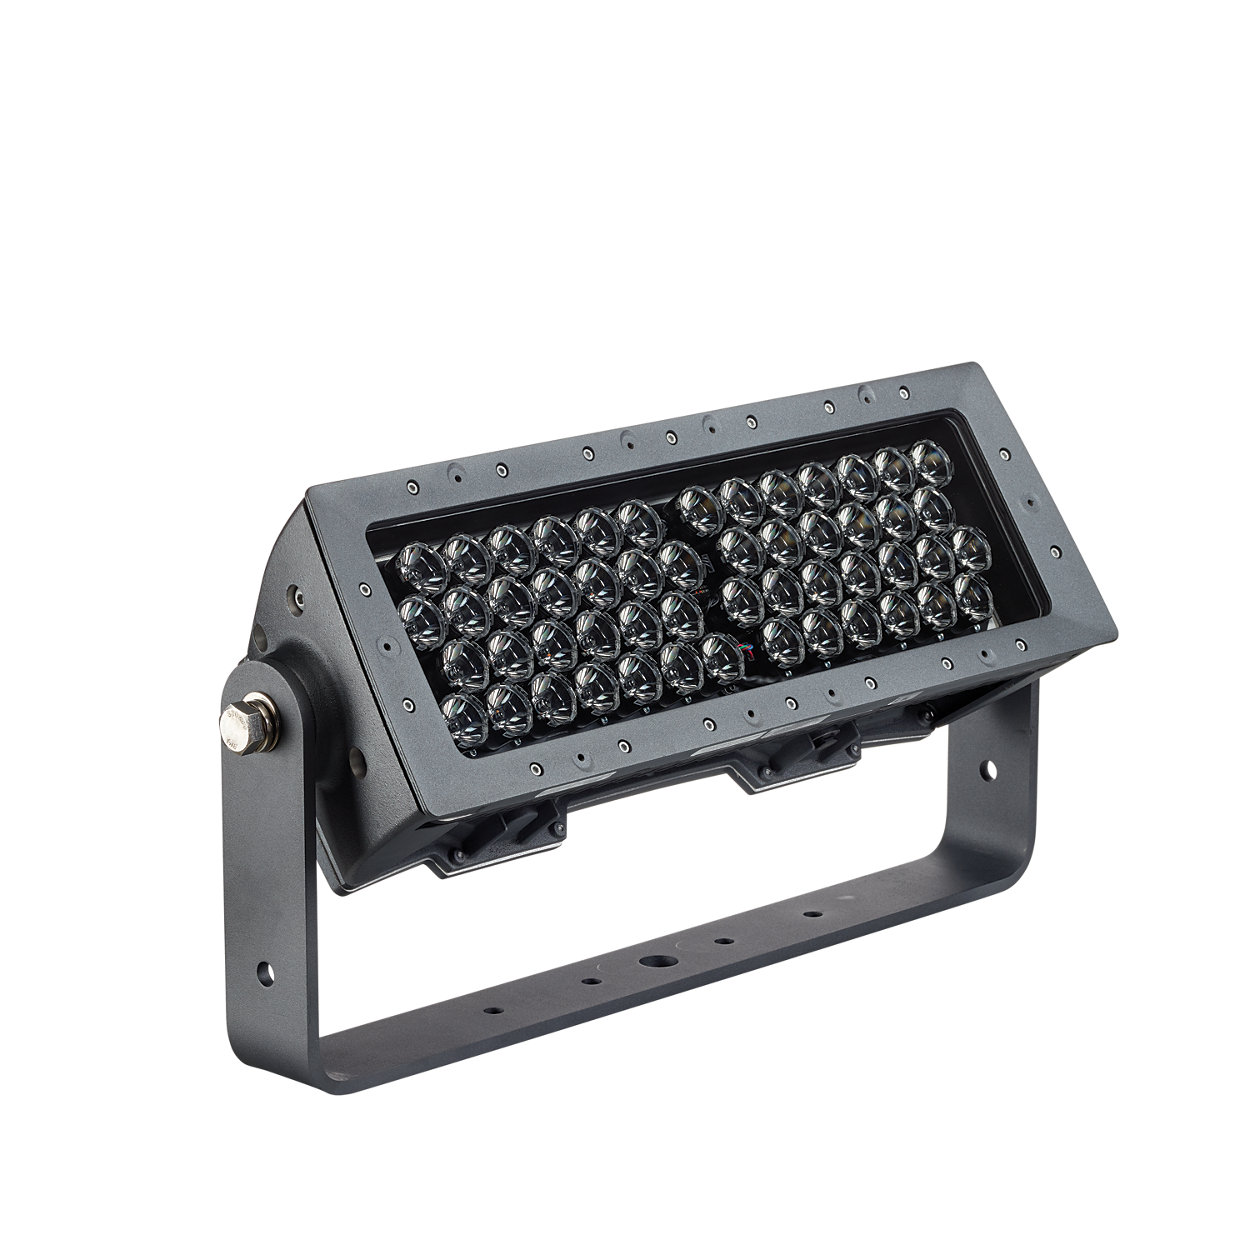 Color Reach Compact Powercore – premium long-throw compact exterior LED floodlight with intelligent colored light